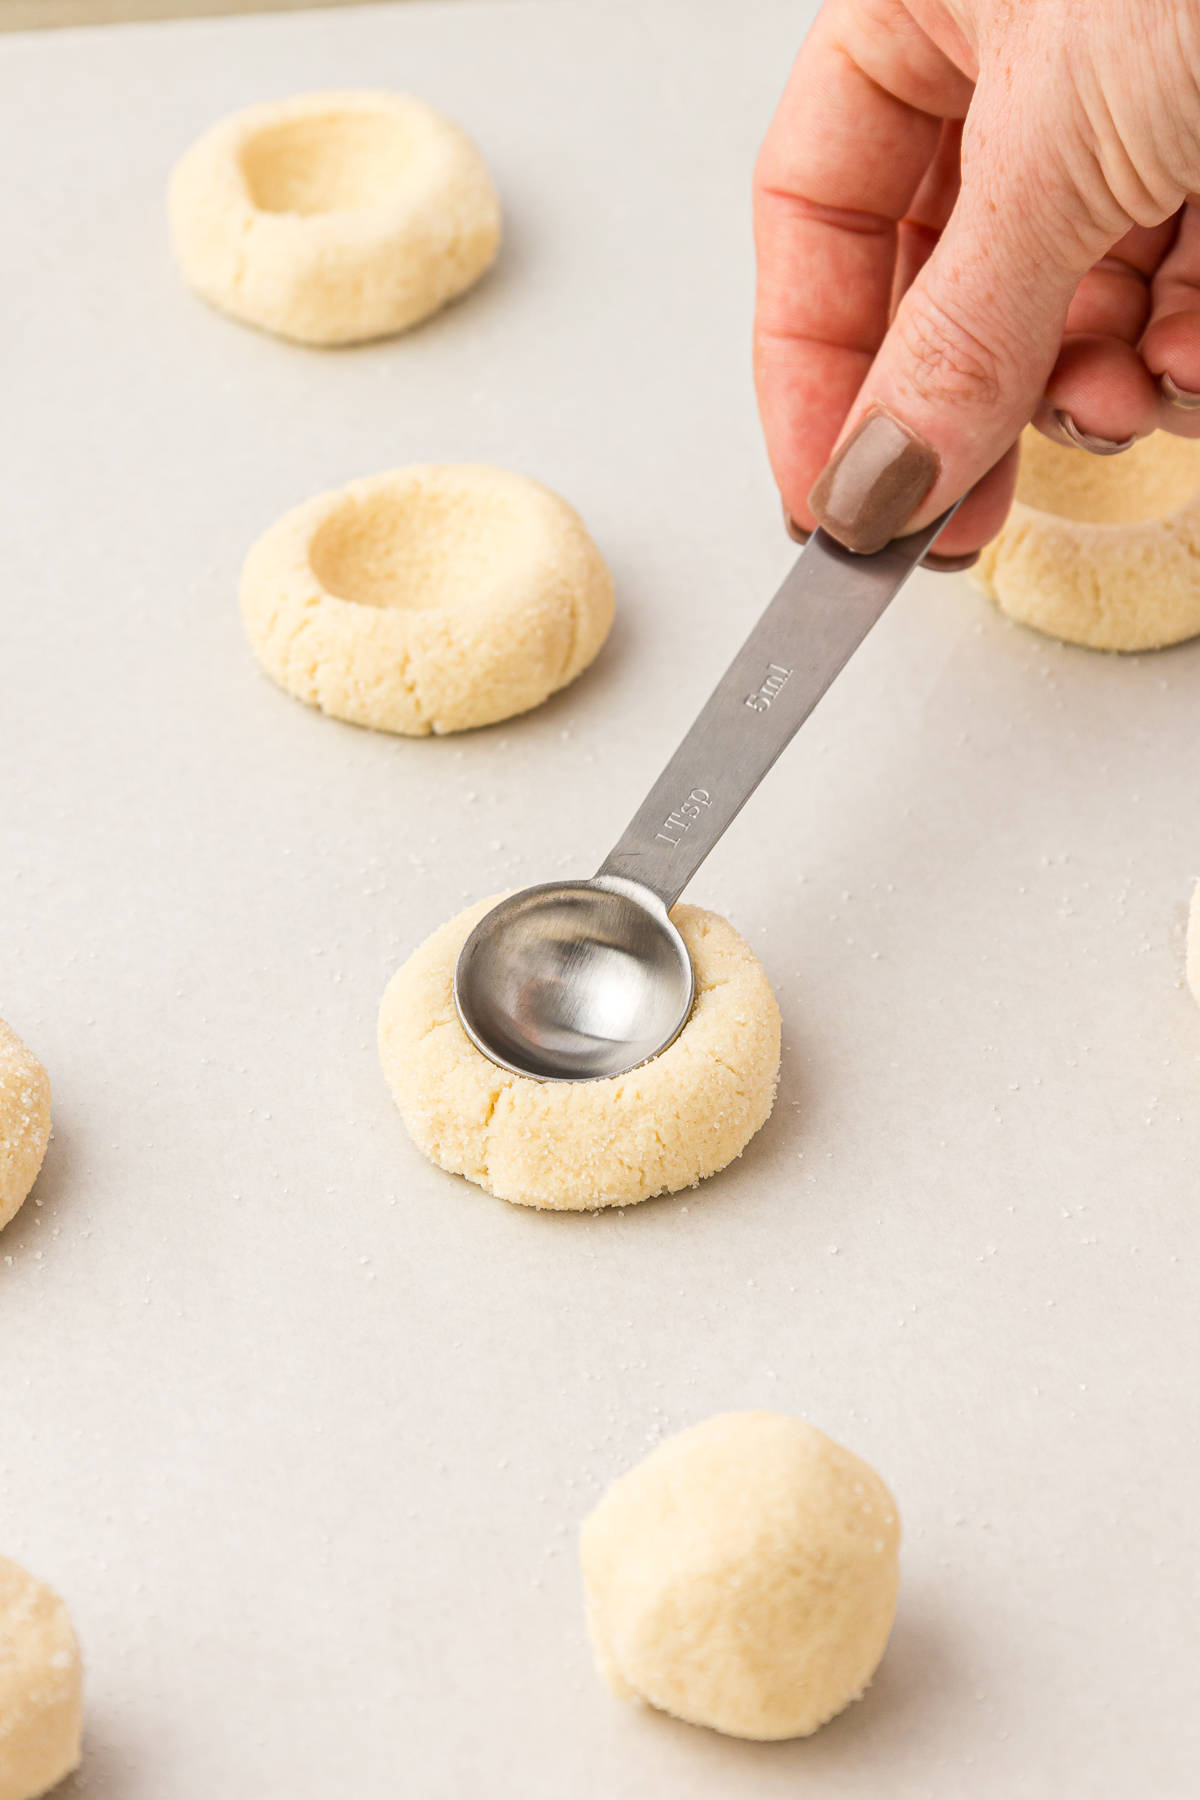 thumbprint cookie dough balls on a baking sheet lined with parchment paper with indentations being pressed in by the back of a spoon